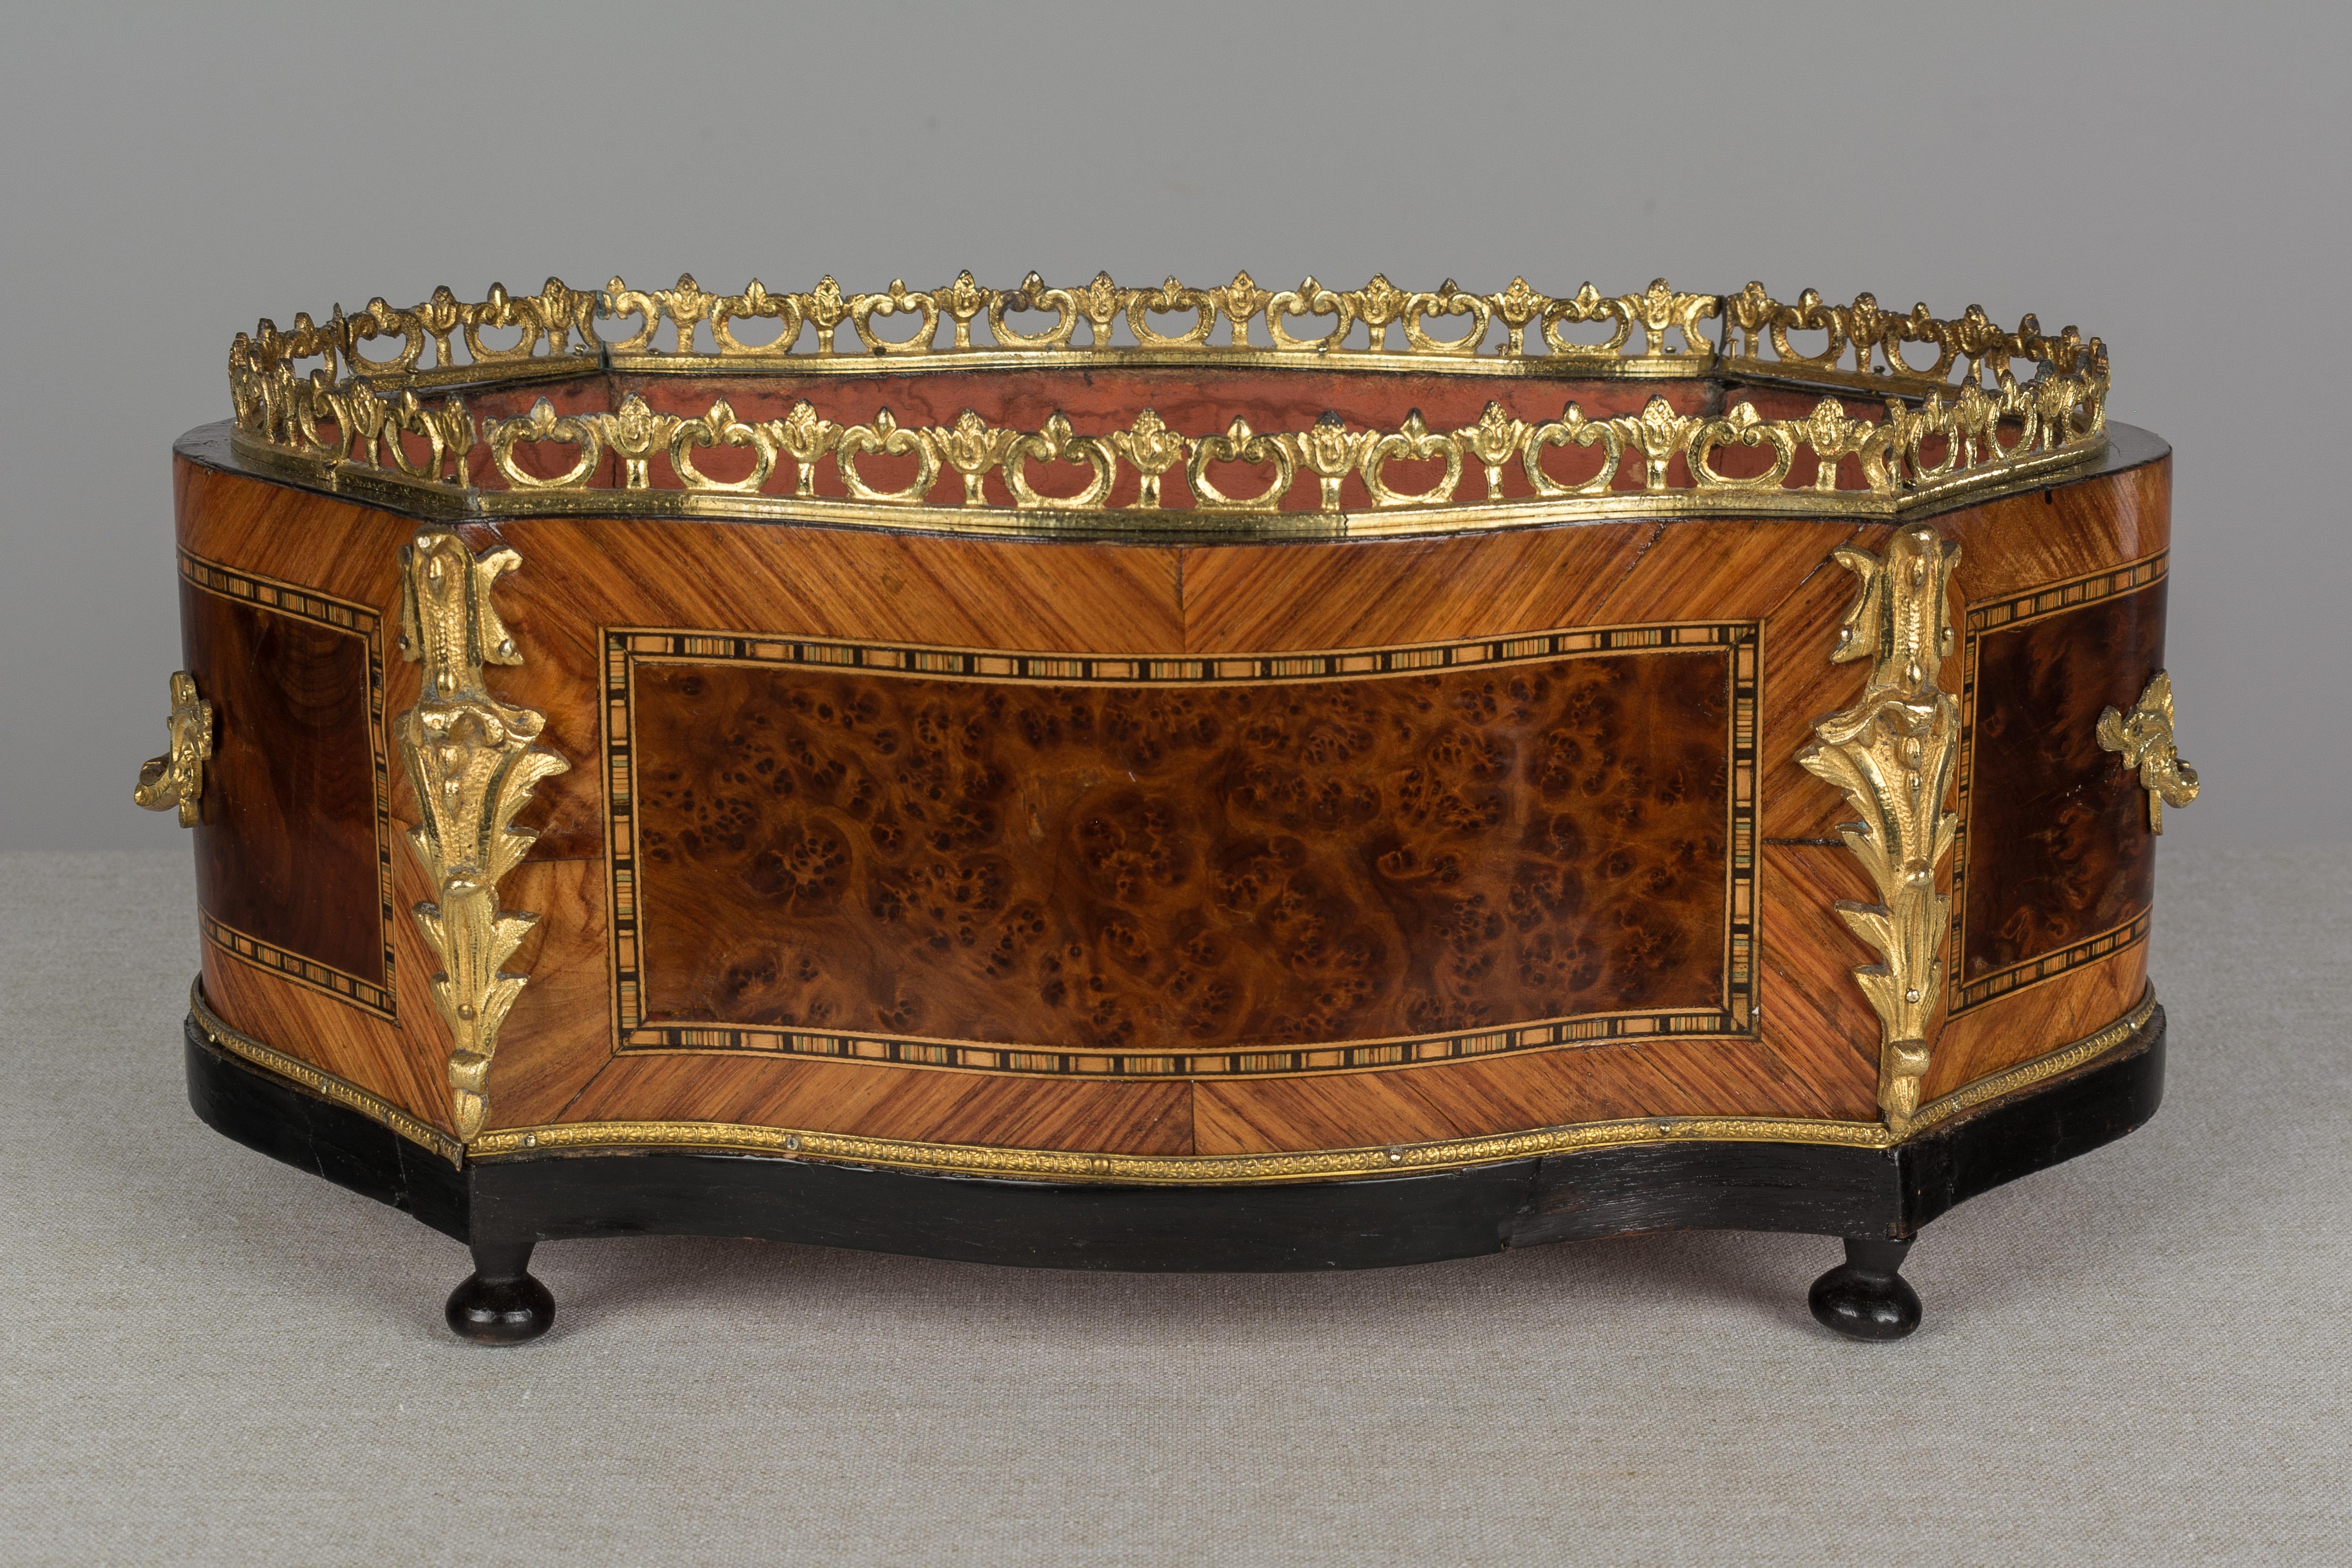 A 19th century French Napoleon III marquetry jardinière made of mahogany with burl of walnut veneer and various wood inlay. Bronze-mounted with two handles, gallery and corner ornaments. Original foil label to underside: P. Sormani. Paul Sormani